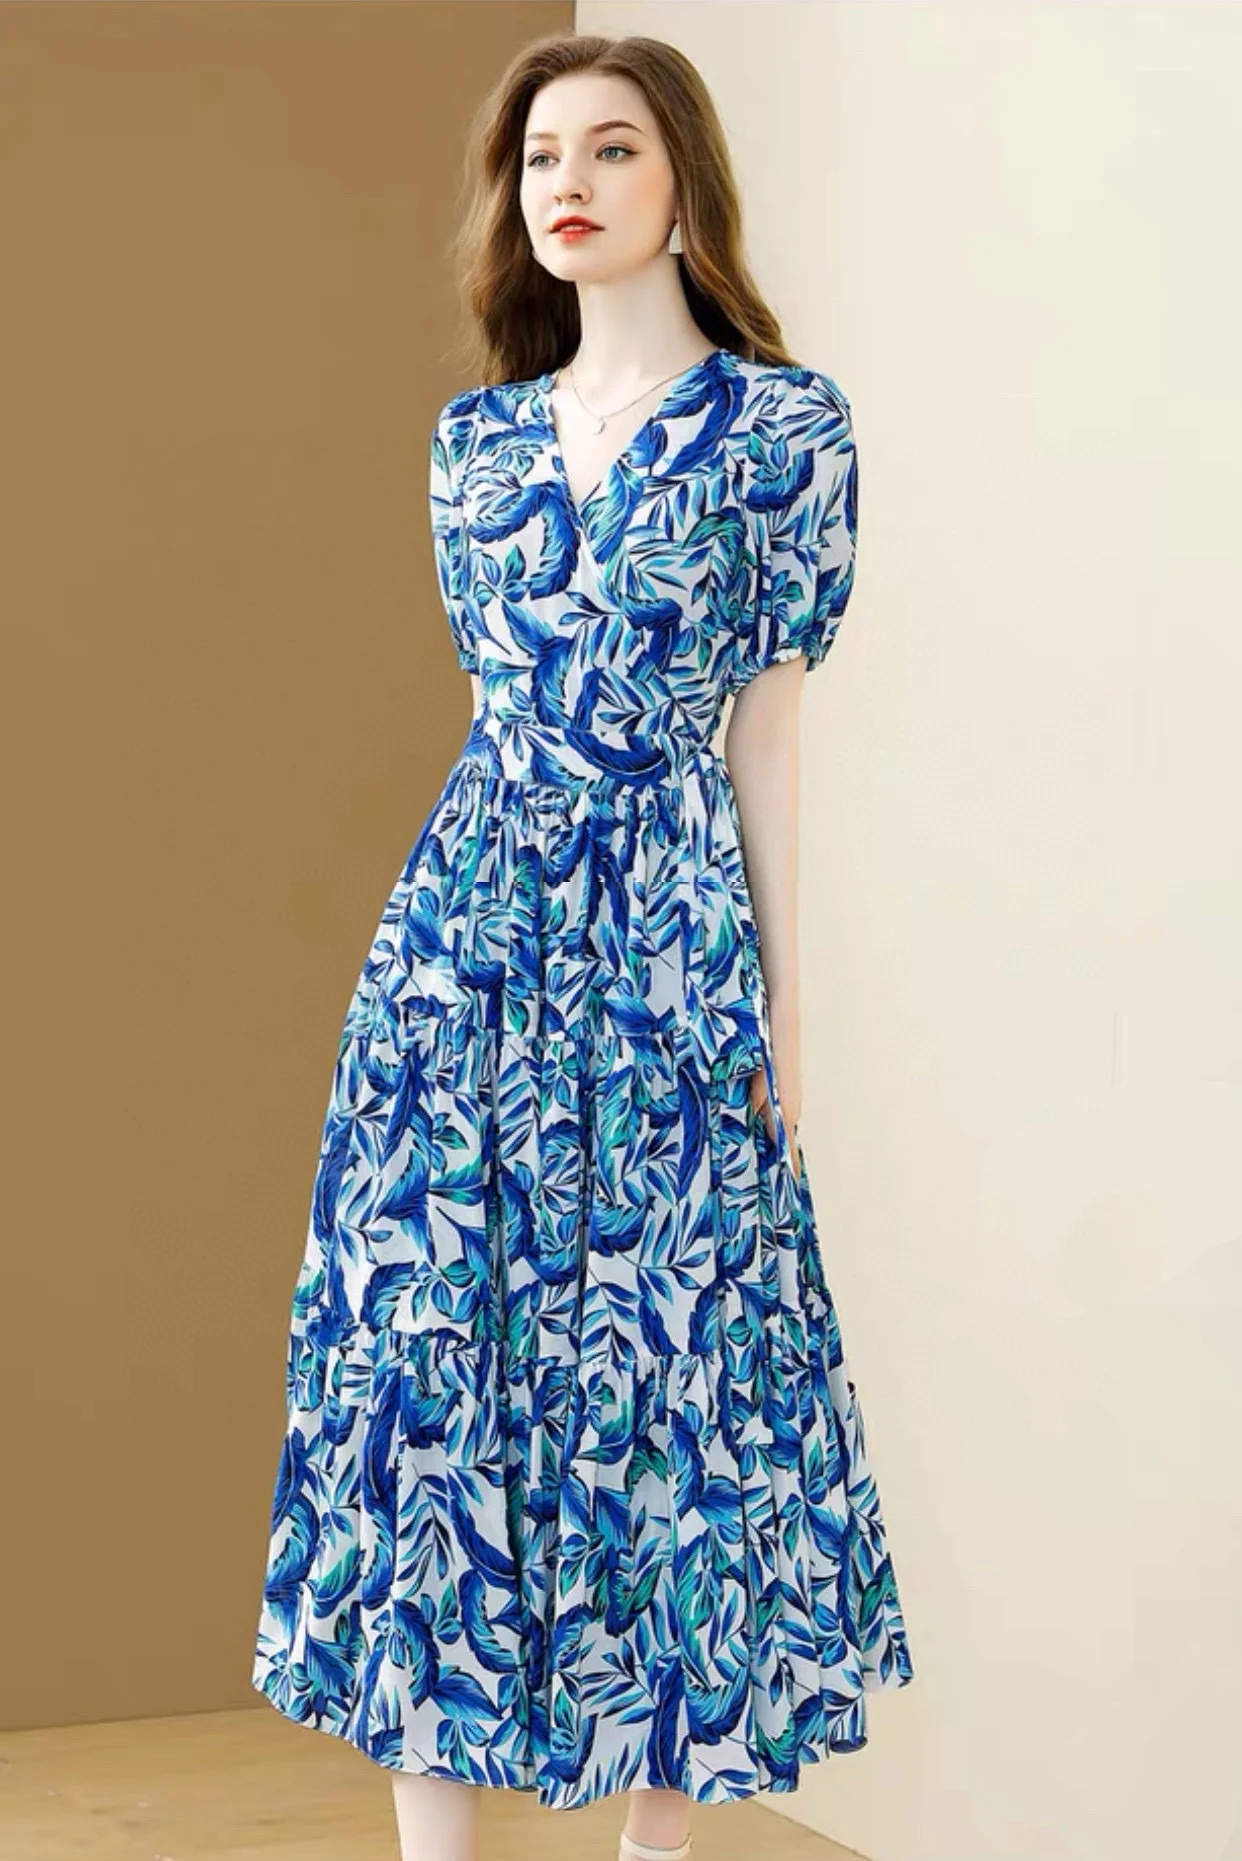 2023 spring and summer women's clothing fashion new Printed Dress 0621